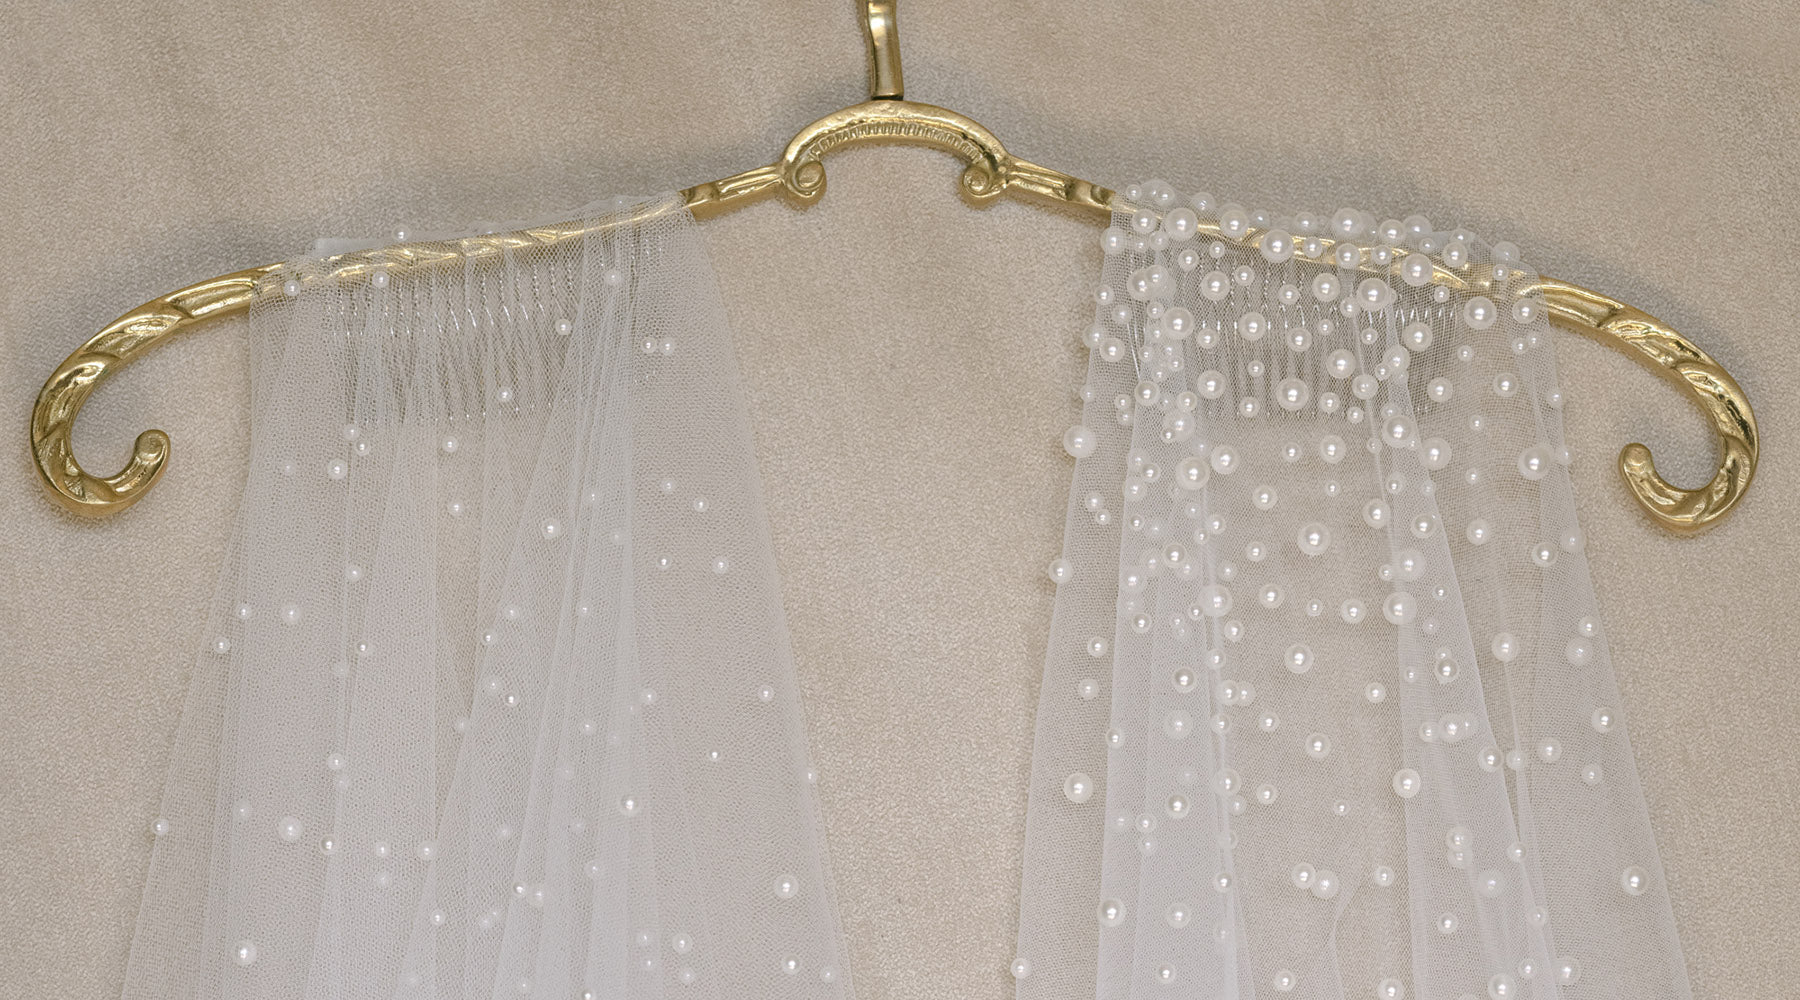 How to Clean a Wedding Veil: The Ultimate Guide